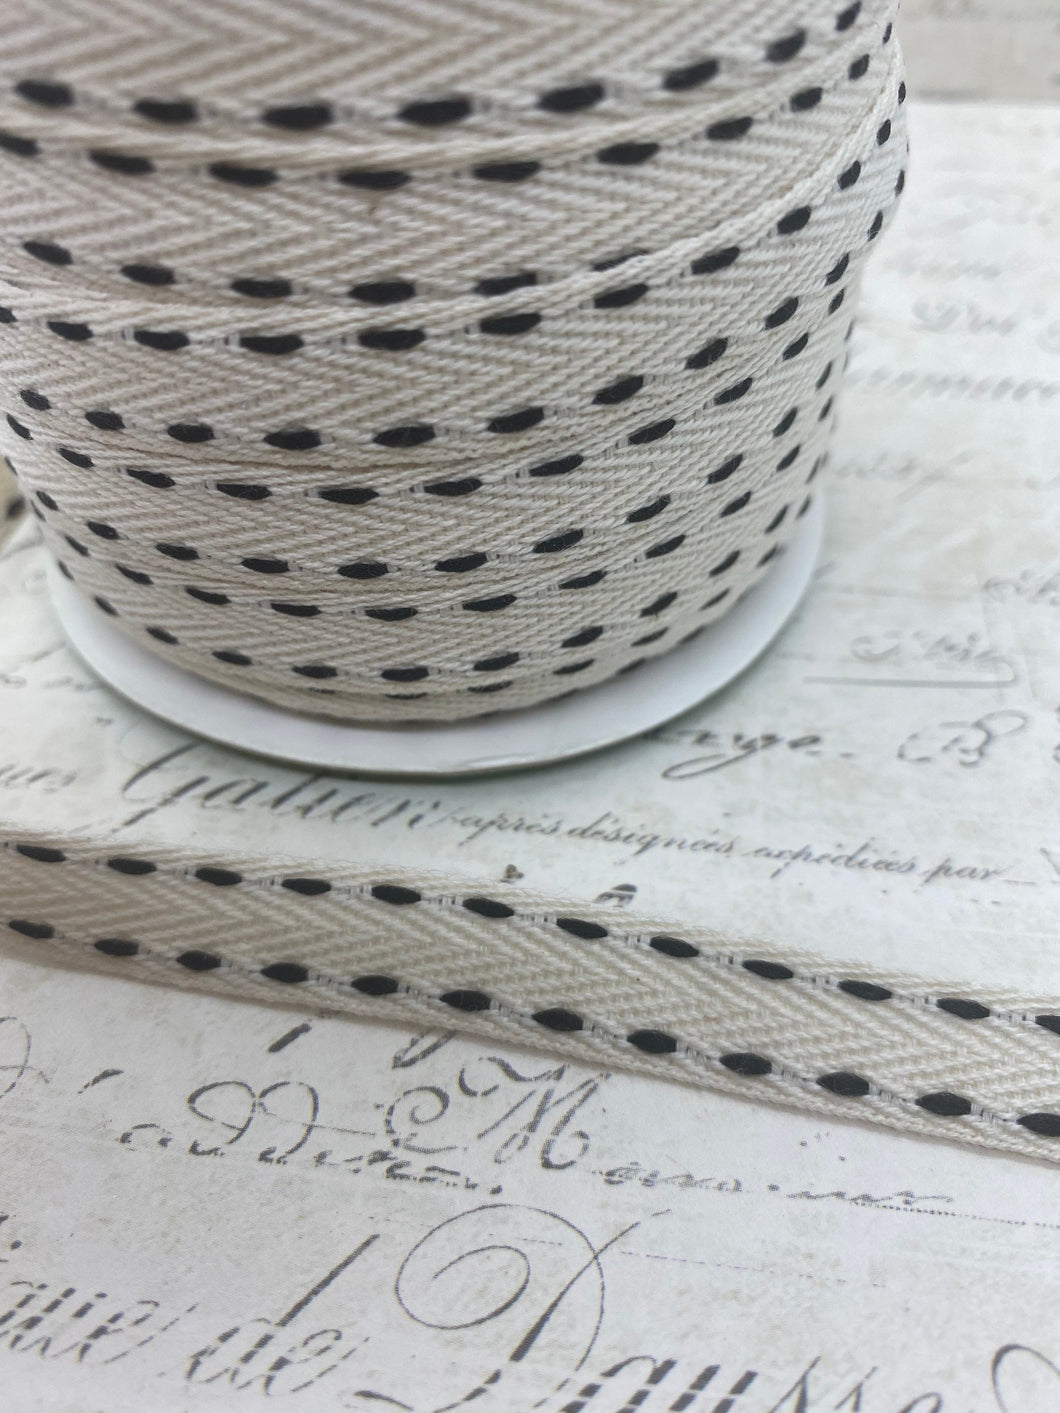 Woven Cotton Ribbon with Black Running Stitch 3/8 wide